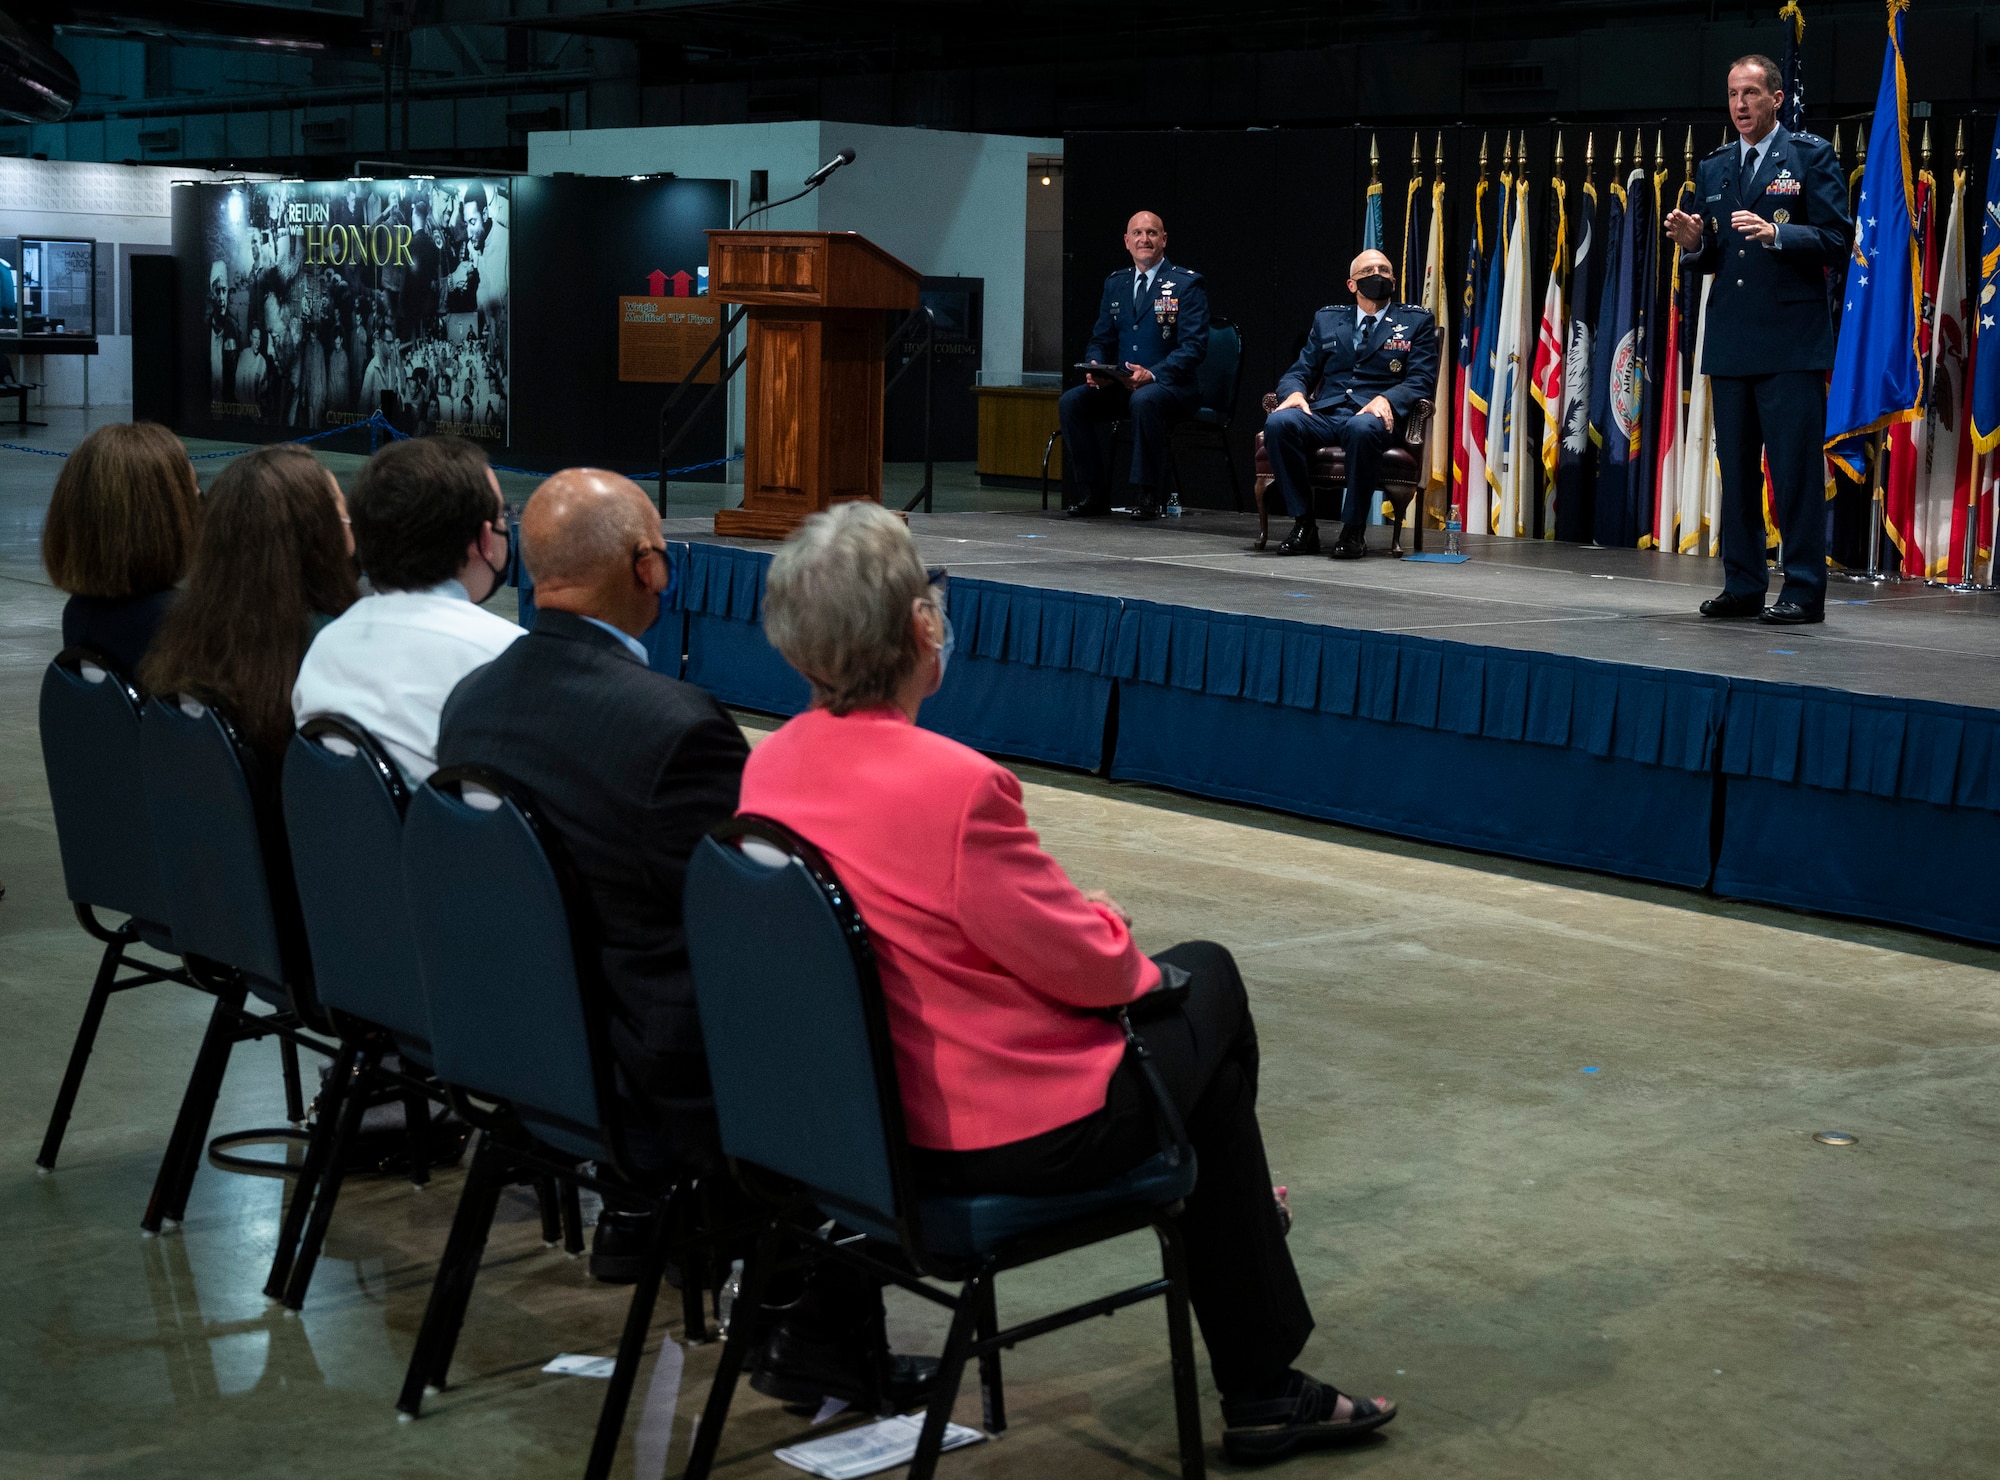 Air Force Life Cycle Management Change of Command Ceremony on September 3, 202o at Wright_Patterson Air Force Base, Ohio.